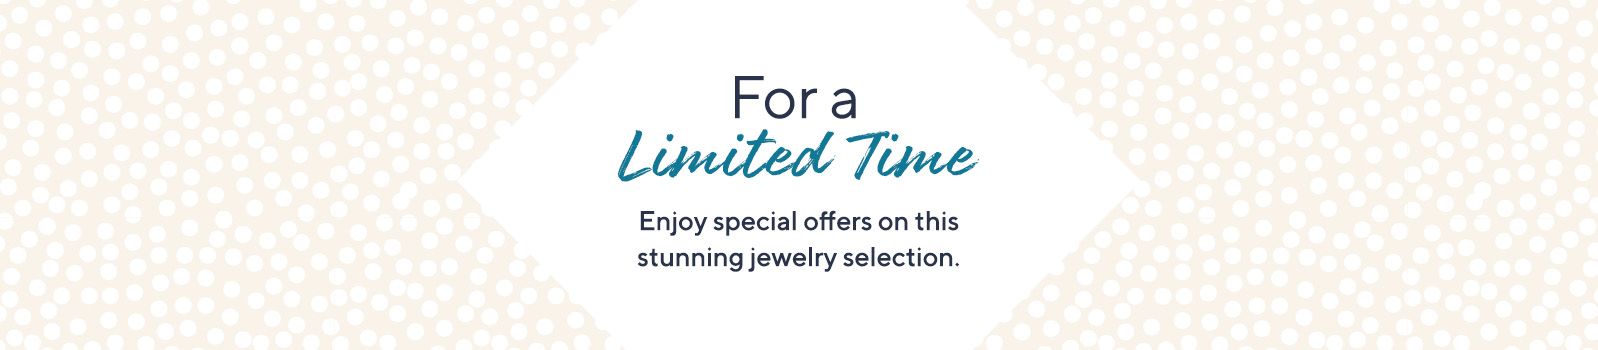  For a Limited Time Enjoy special offers on this stunning jewelry selection.